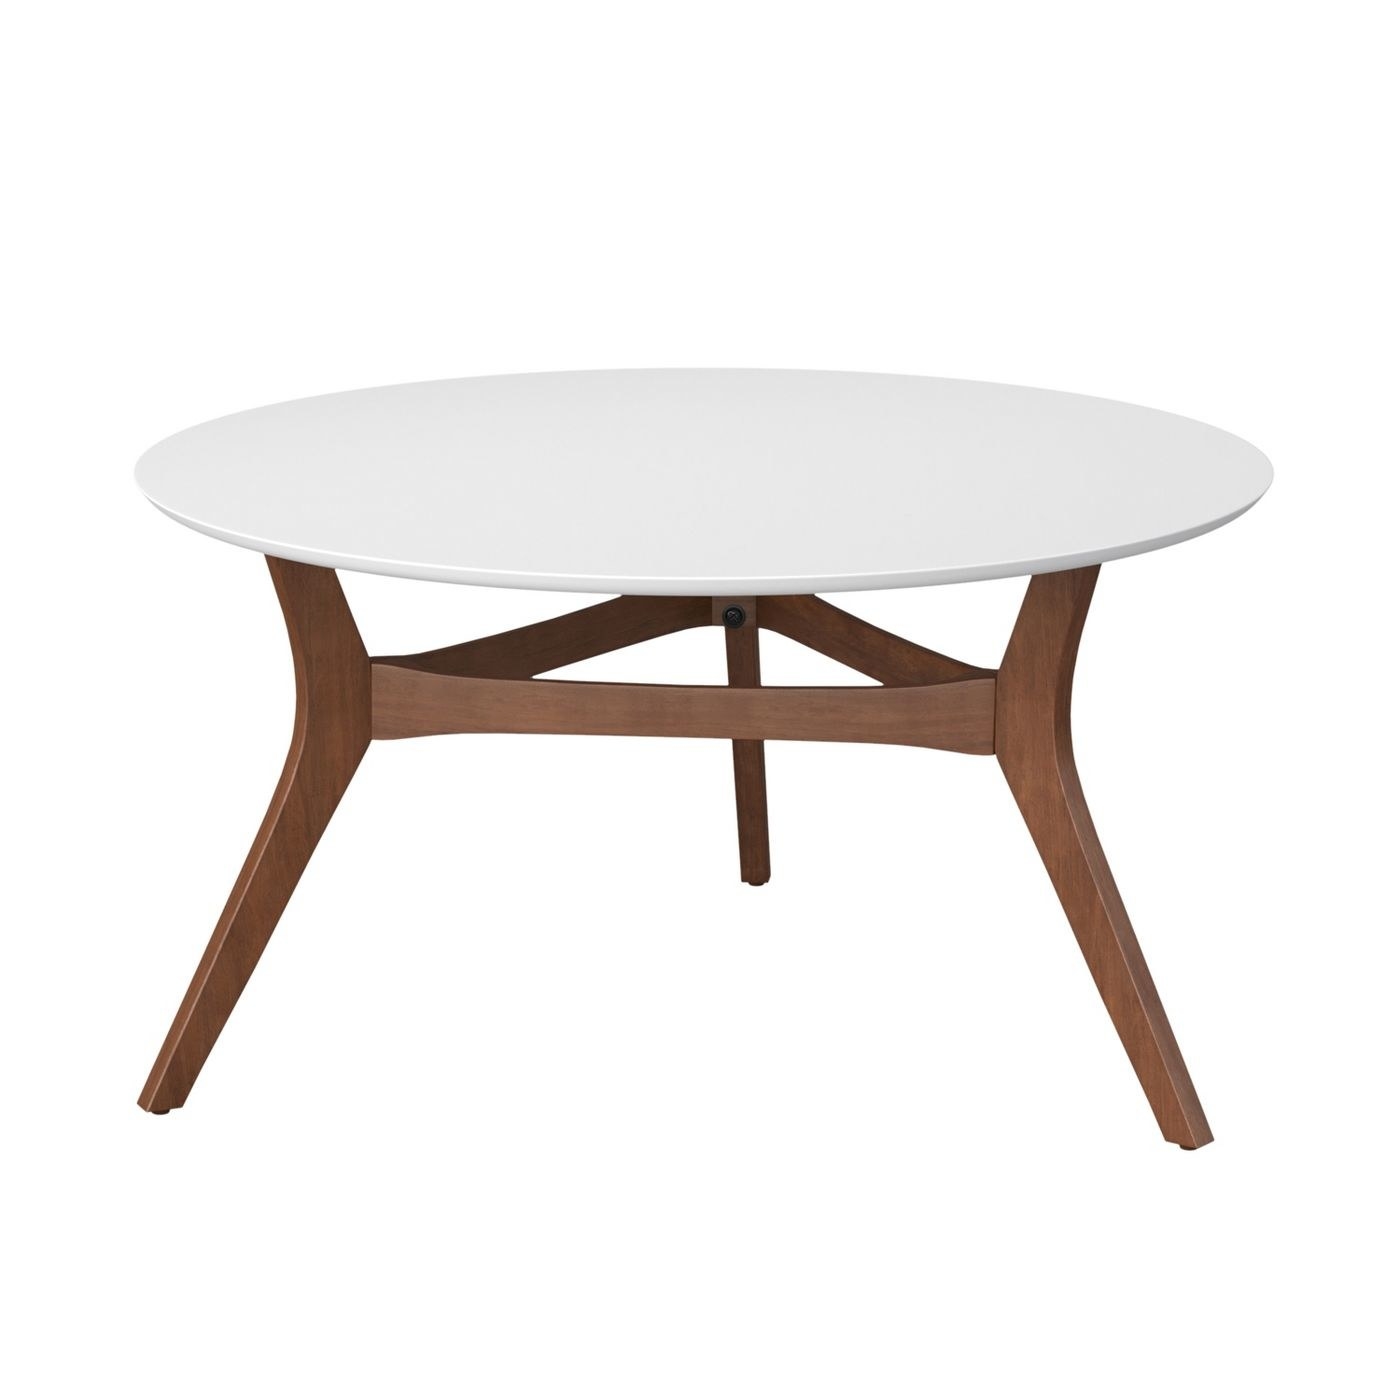 White circular table and brown bottom legs